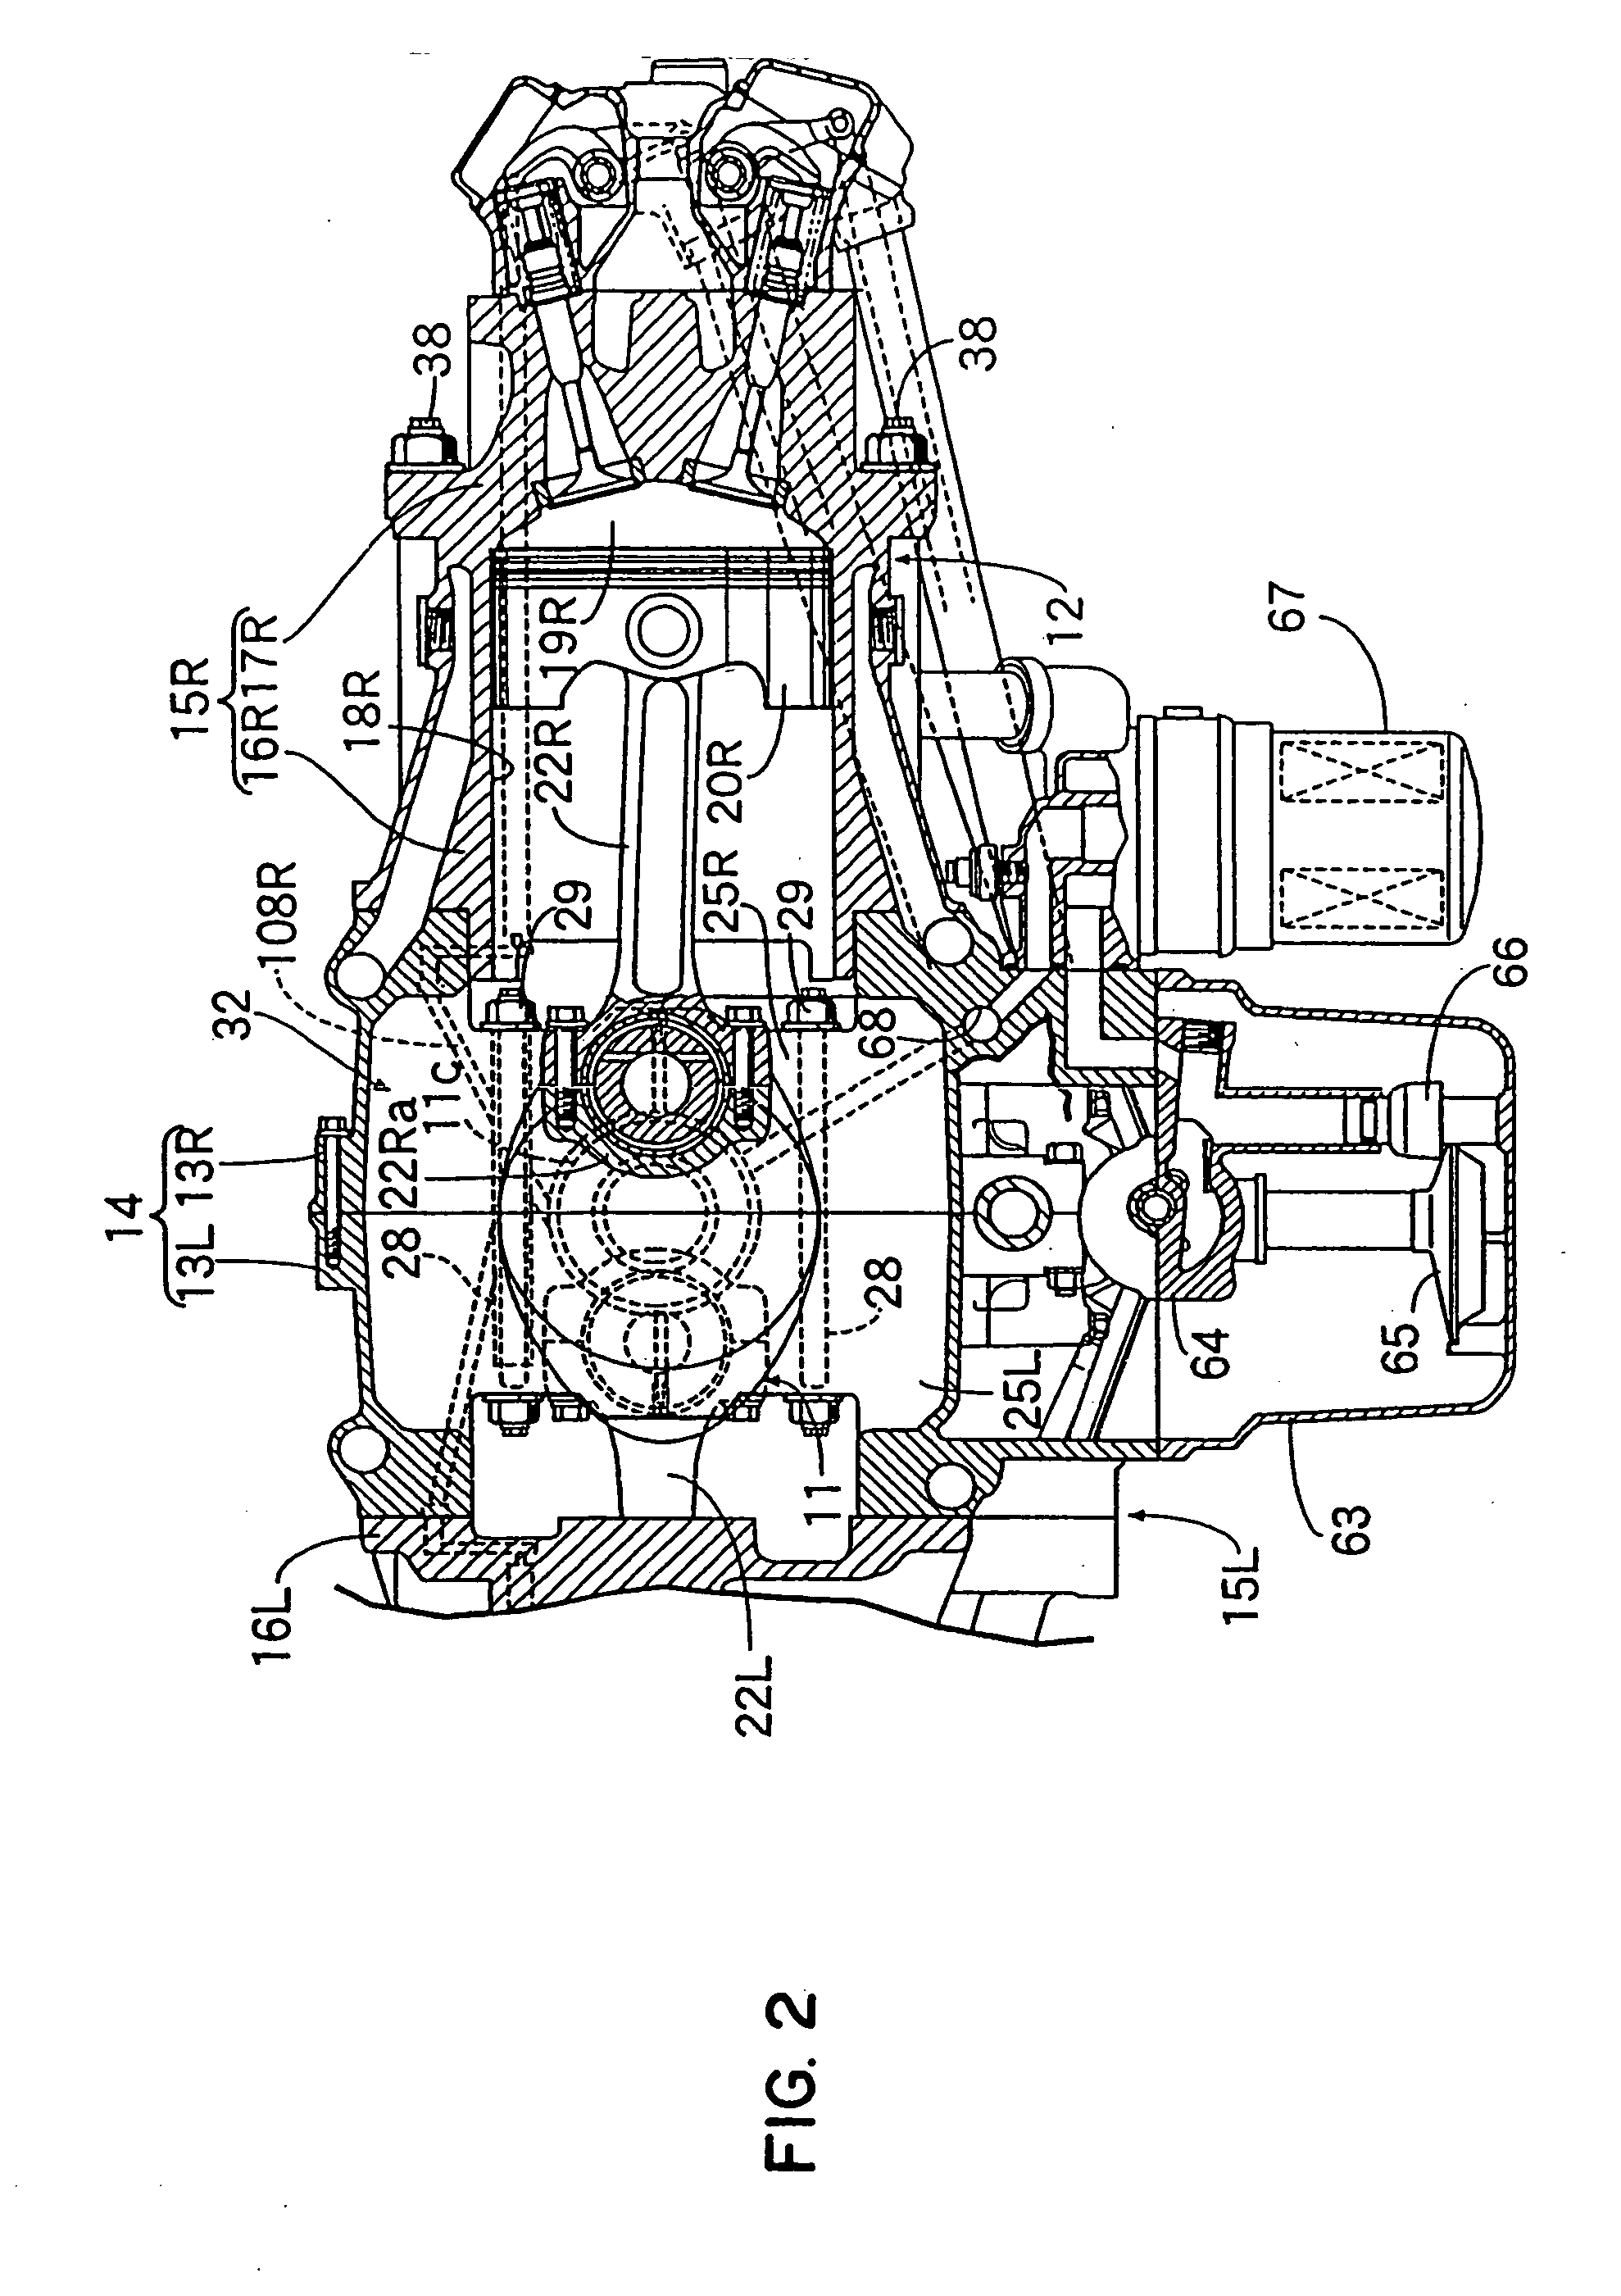 Vibration prevention structure in engine